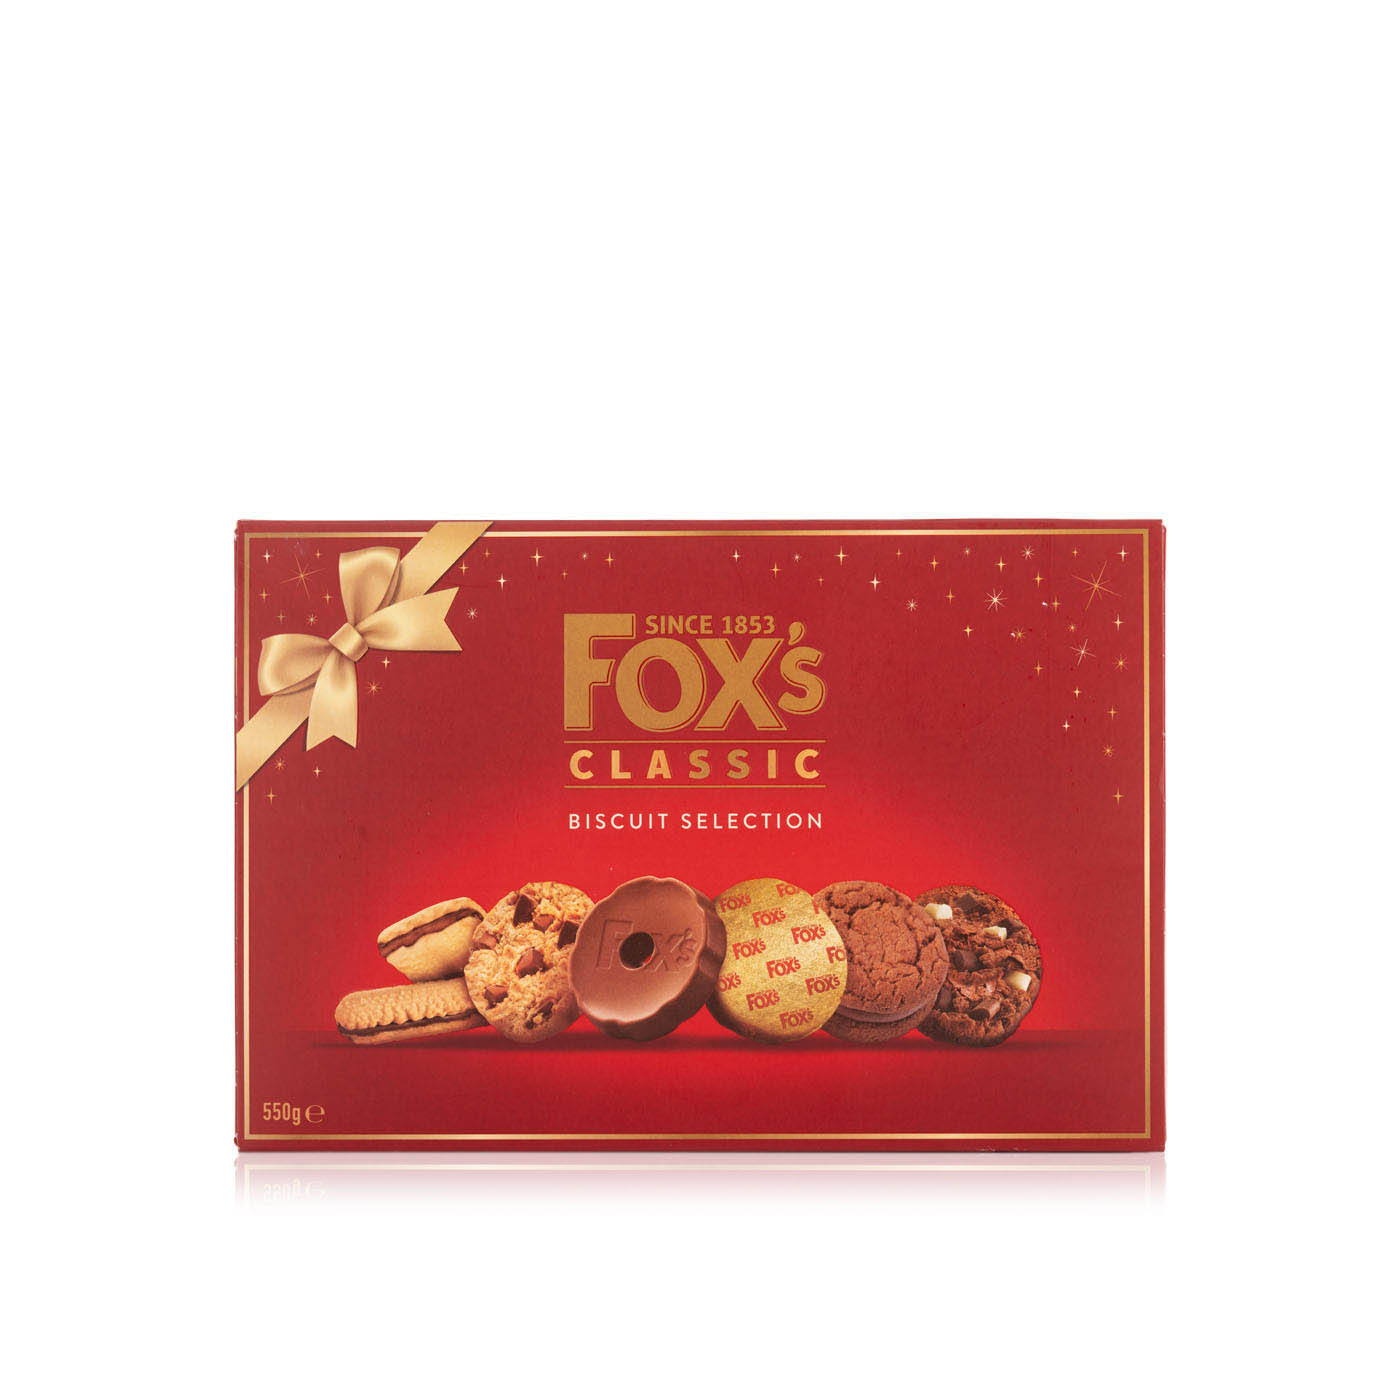 Foxs Classic Biscuit Selection 550g Spinneys Uae